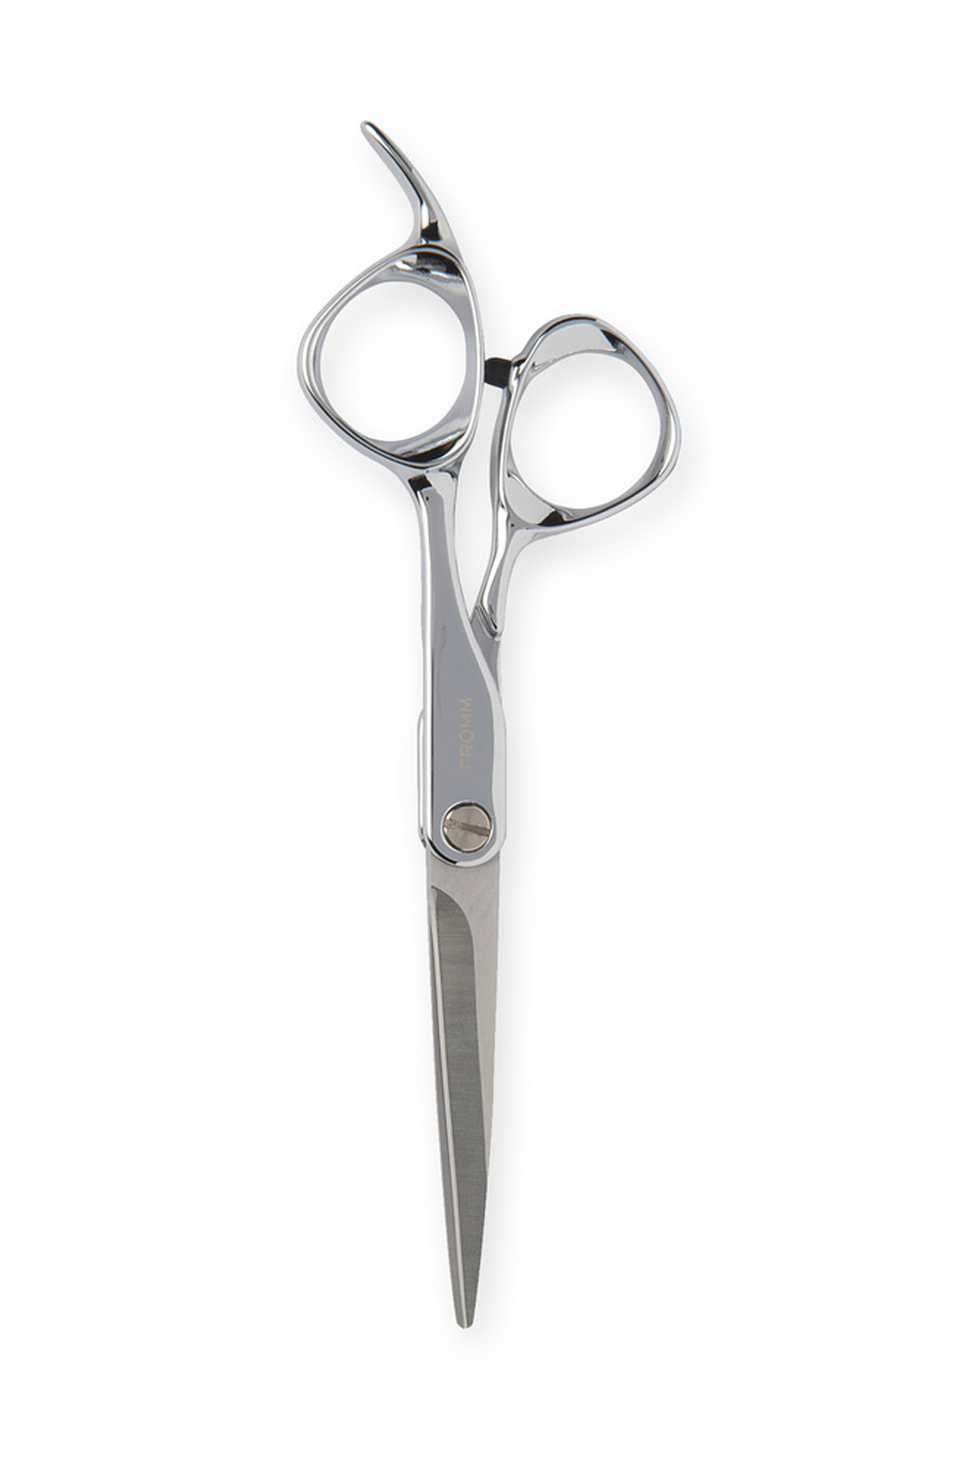 Fagaci Professional Hair Scissors 5 inch with Extremely Sharp Blades 440C Steel Hair Cutting Scissors Durable Smooth Motion & Fine Cut Barber Scis